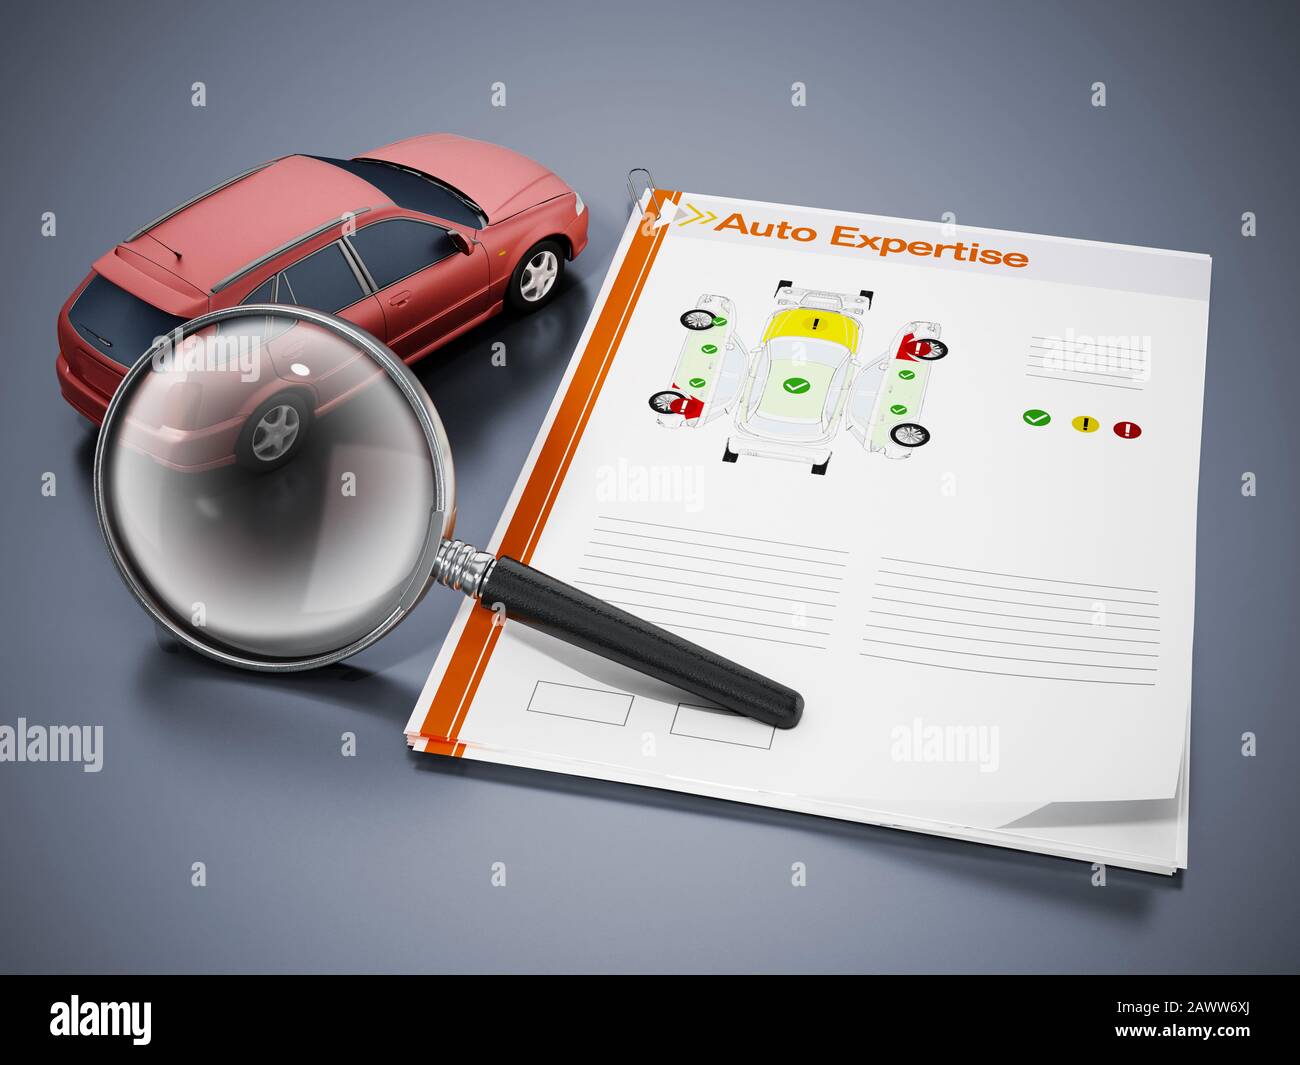 Auto expertise concept. Magnifying glass on the model car with test results. 3D illustration. Stock Photo